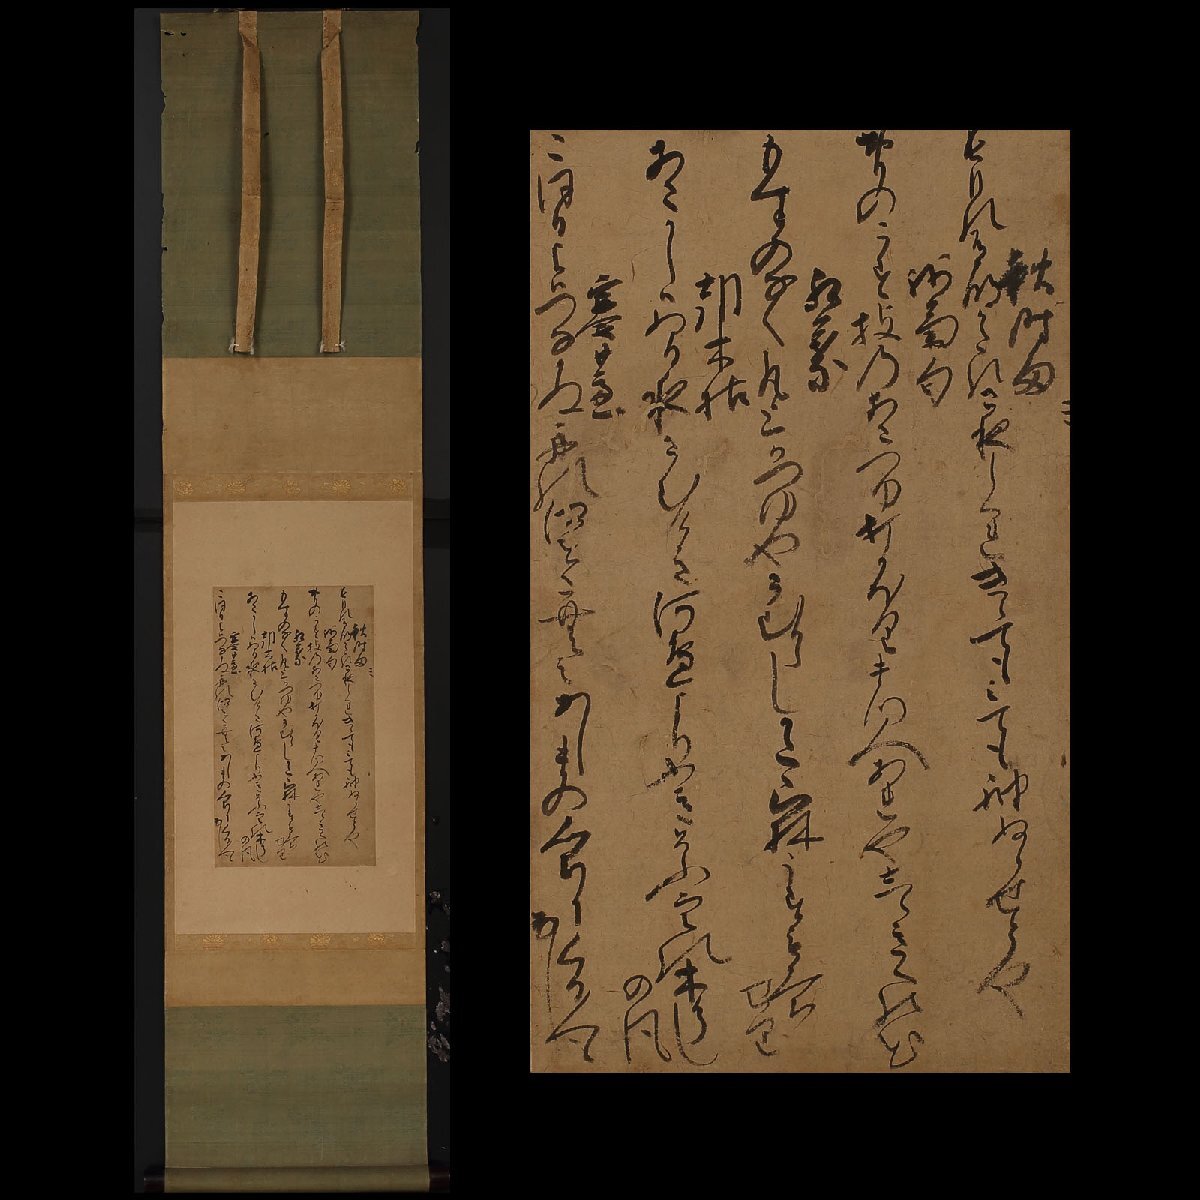 [ deep peace ] Muromachi period *. rotation law wheel three article real amount volume thing cut not yet details house compilation cut ( old writing brush cut four half cut . house .. middle . old document paper house . writing brush . old .book@)